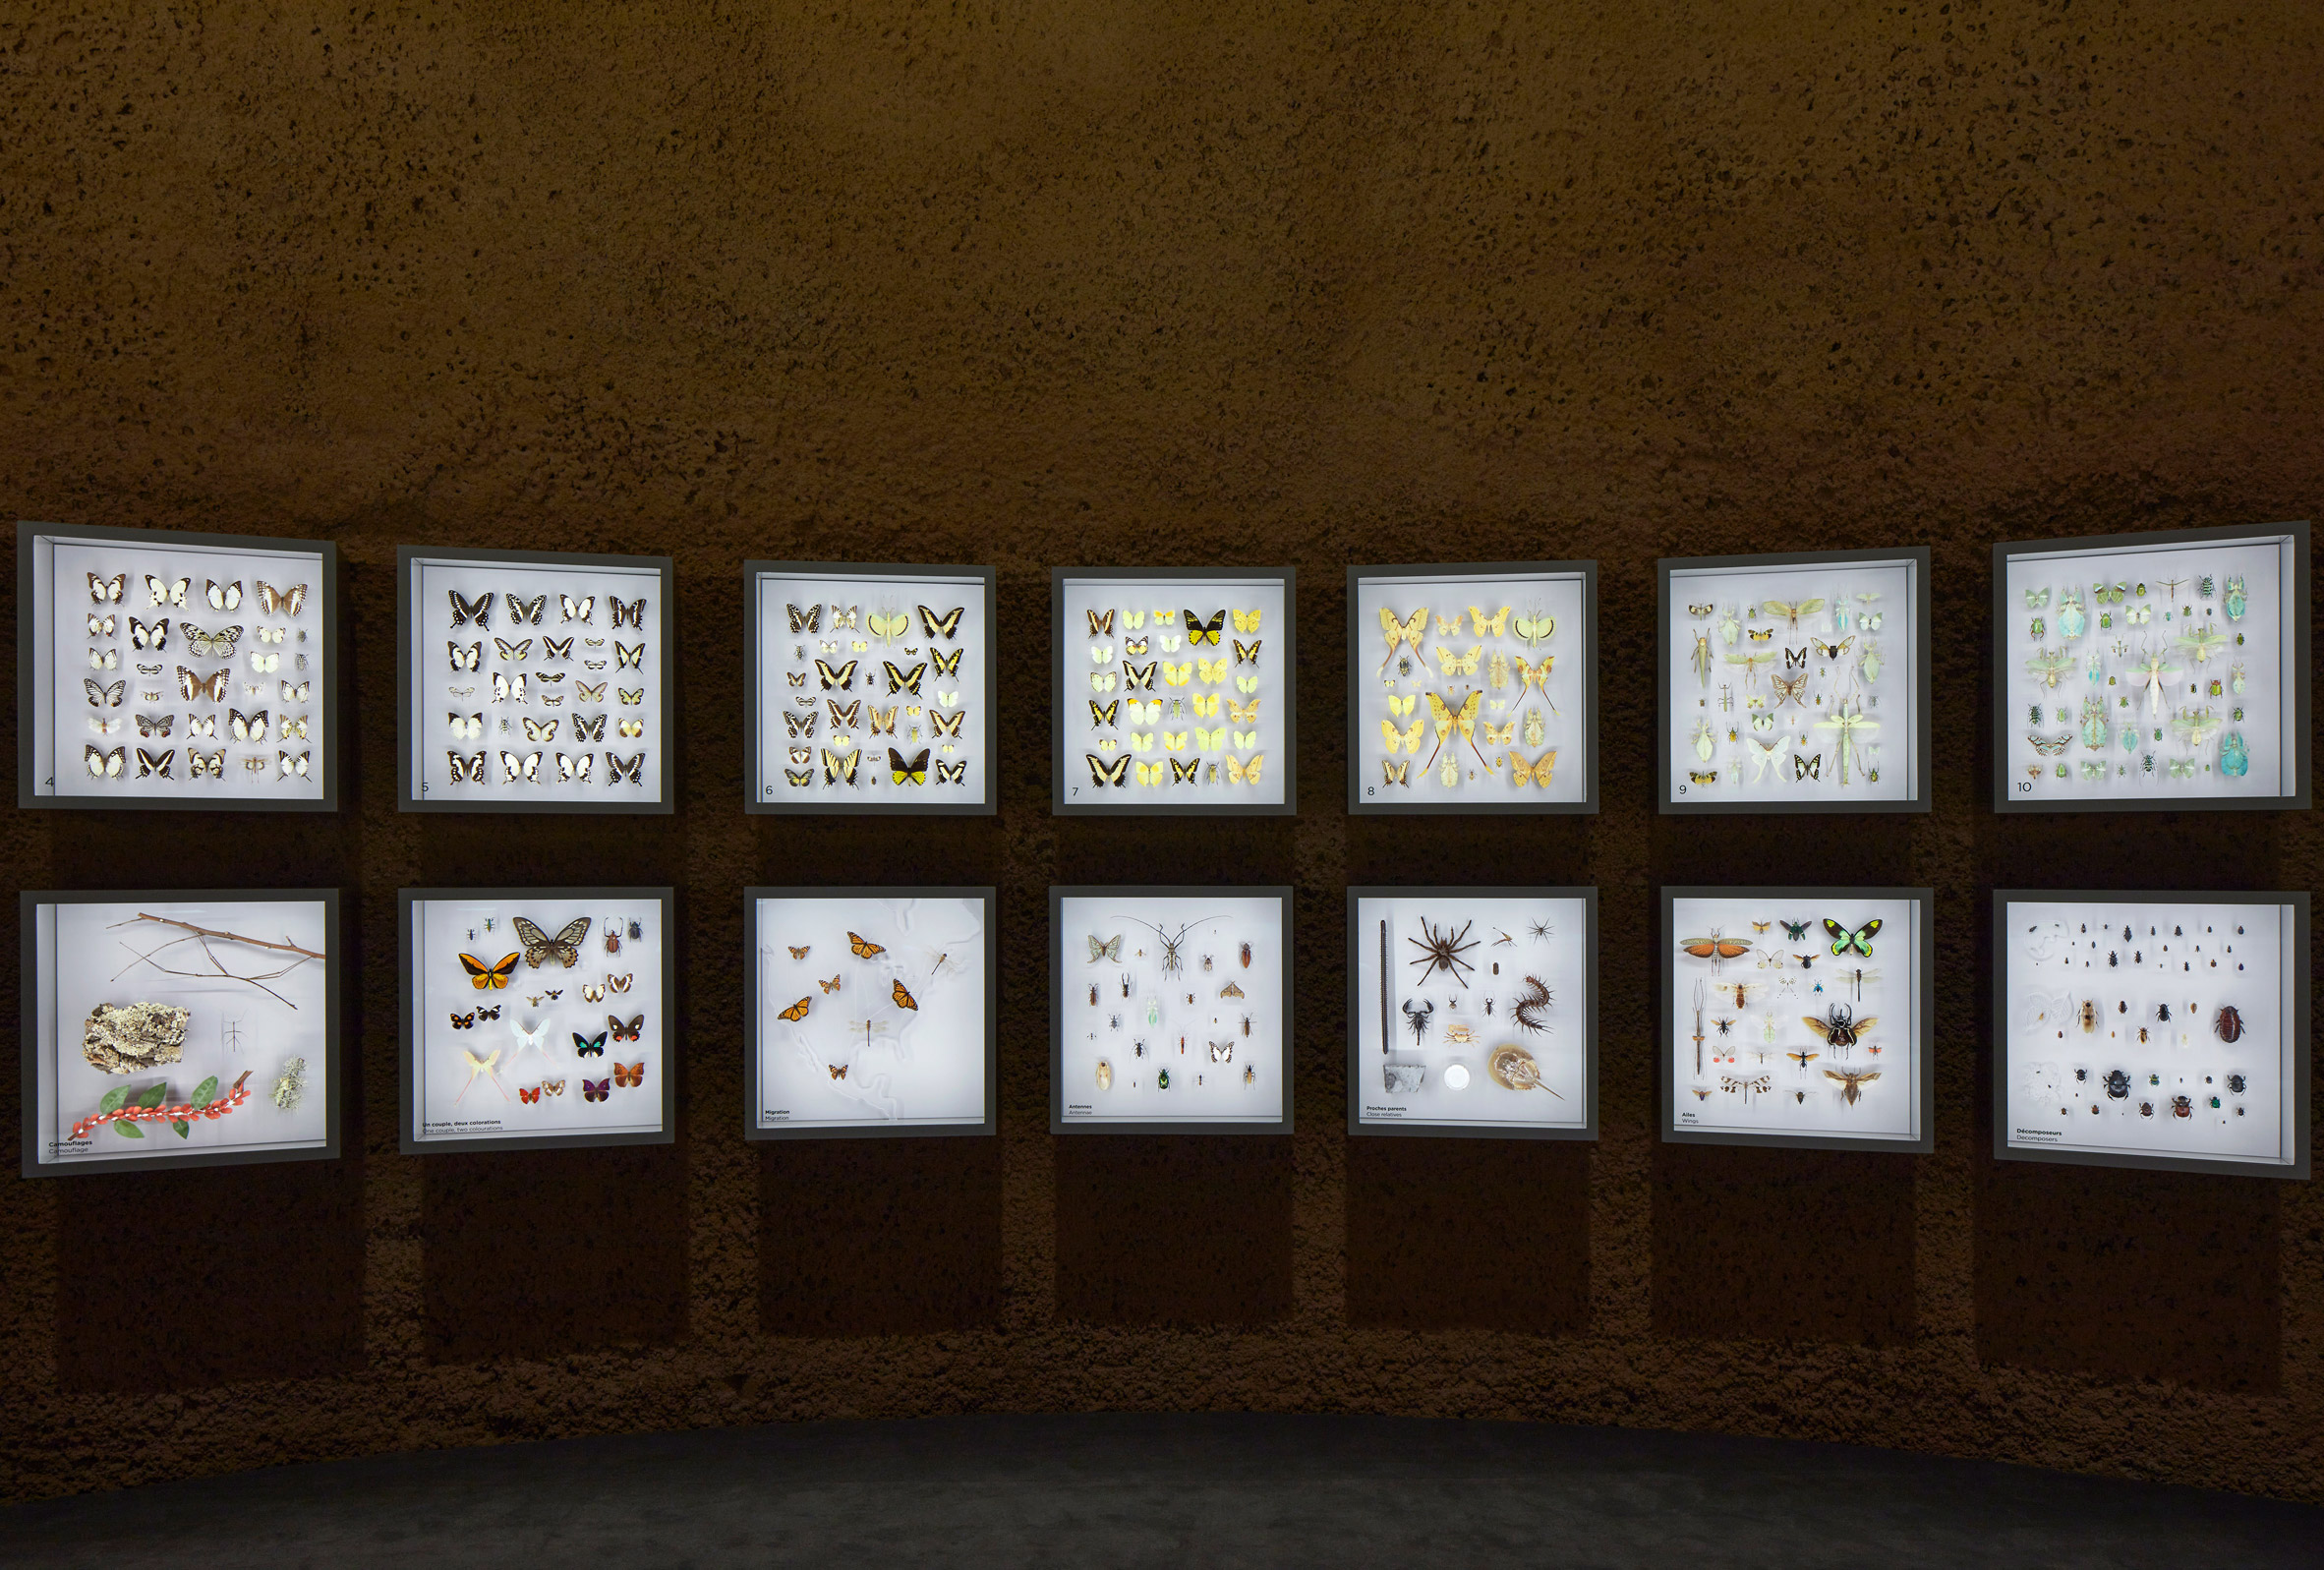 Preserved specimens in illuminated boxes at Montreal Insectarium